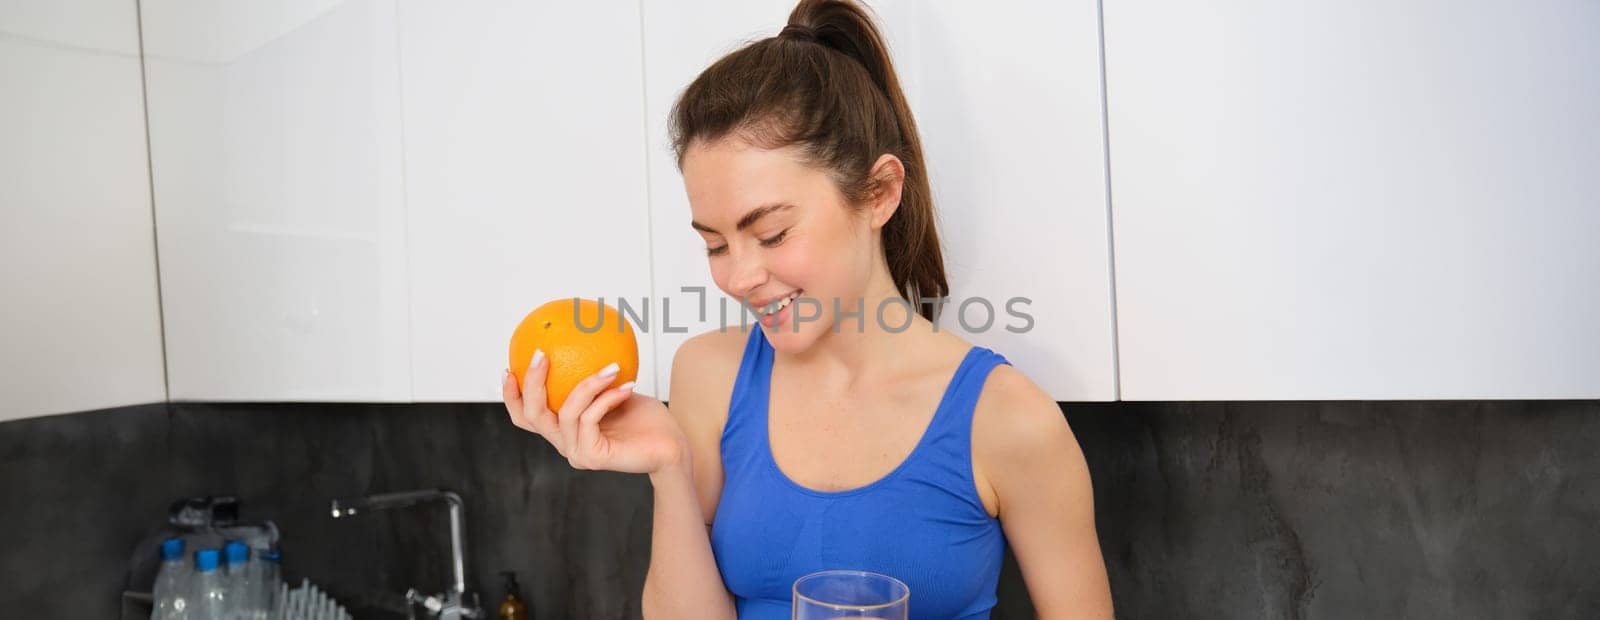 Wellbeing and sport. Young smiling nutritionist, fitness girl holding orange and fresh juice, drinking it from glass and looking happy, posing in sportsbra and leggings, standing in kitchen by Benzoix